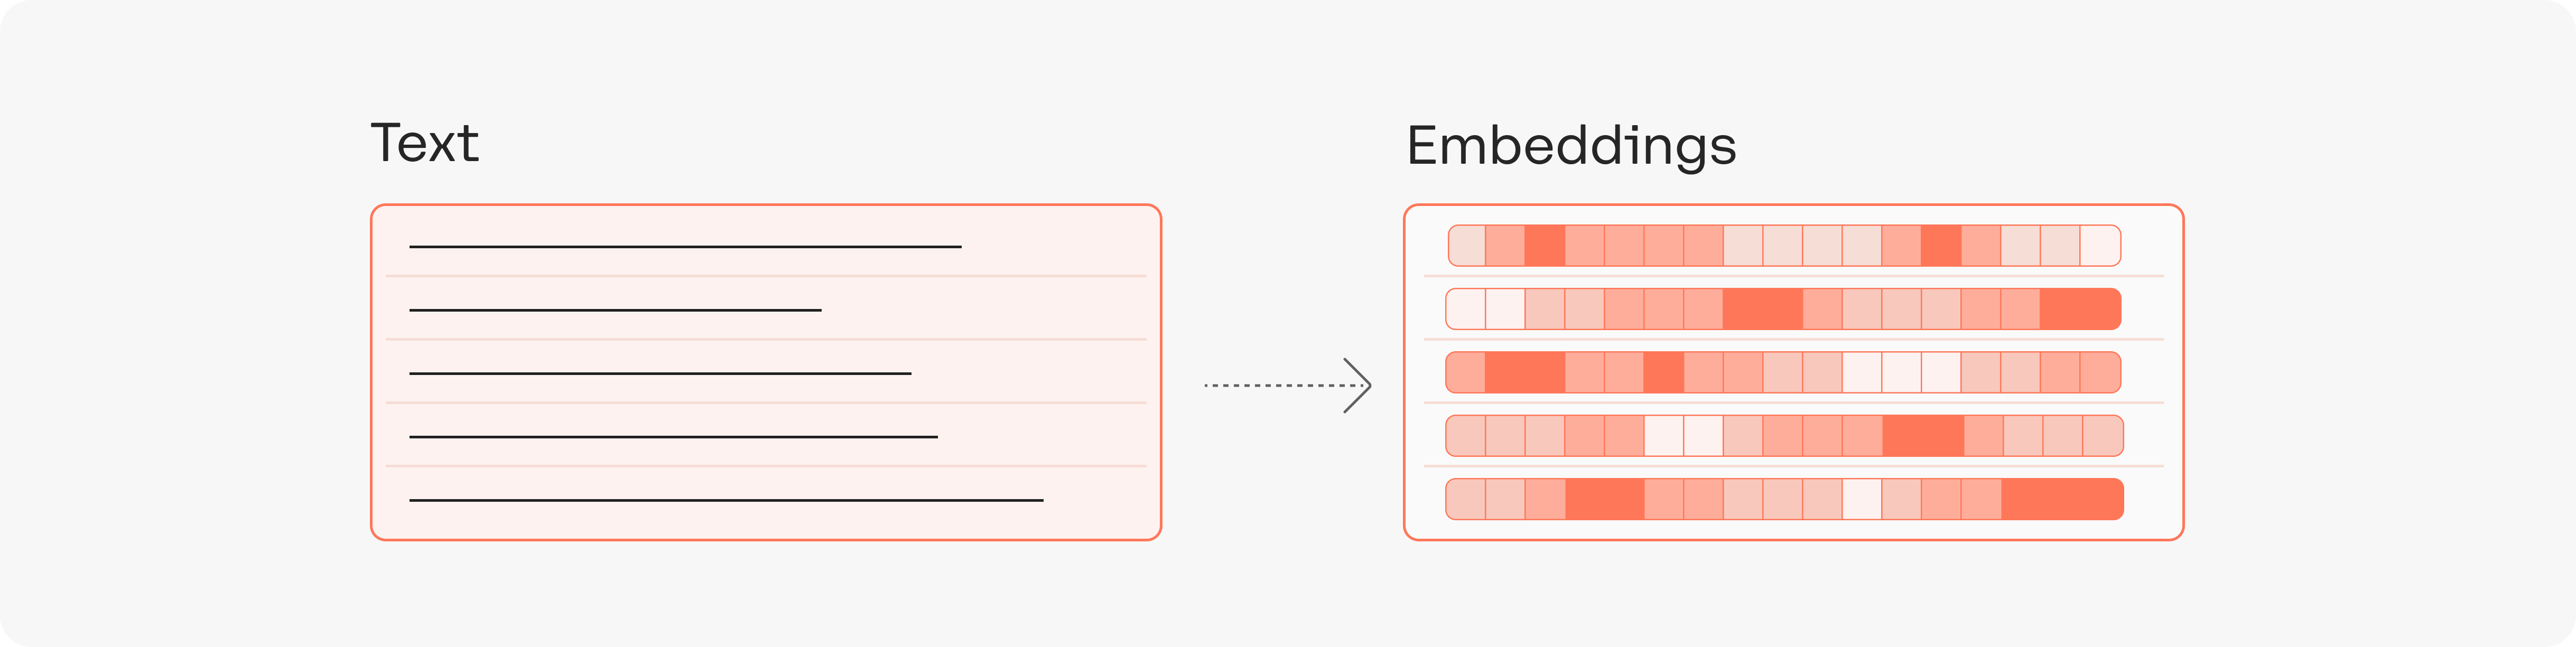 Turning text into embeddings.